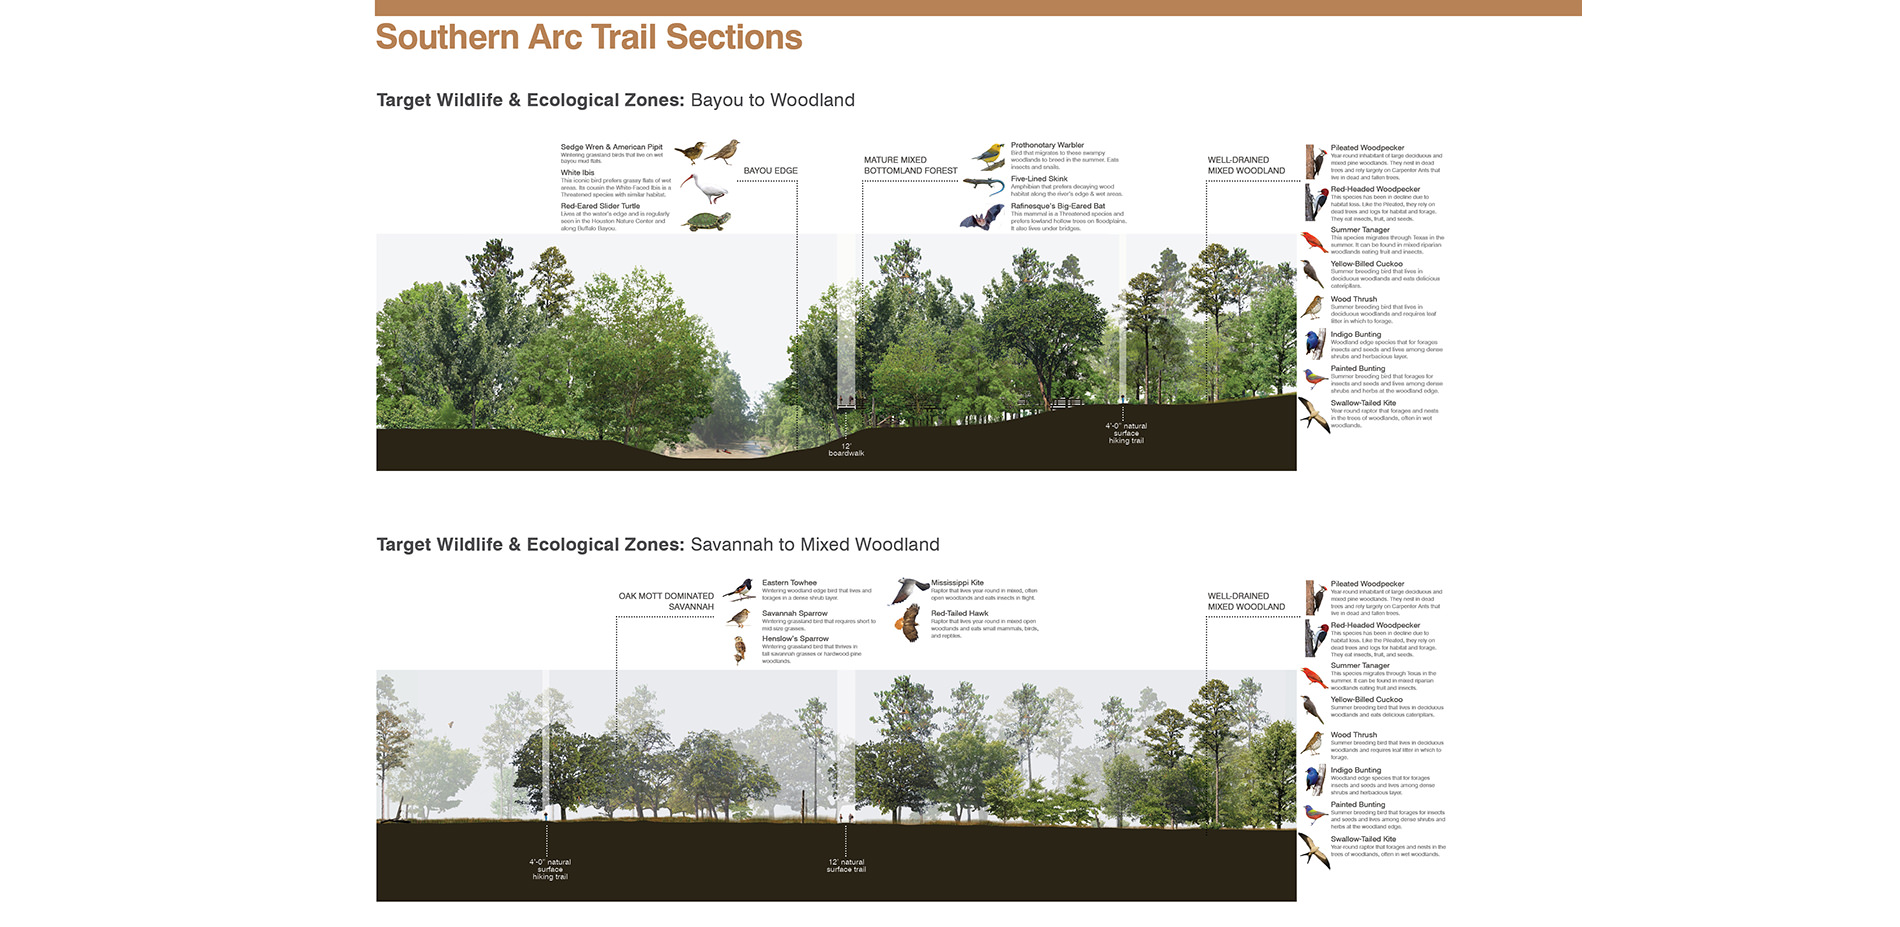 Illustrations of Southern Arc Trail Sections